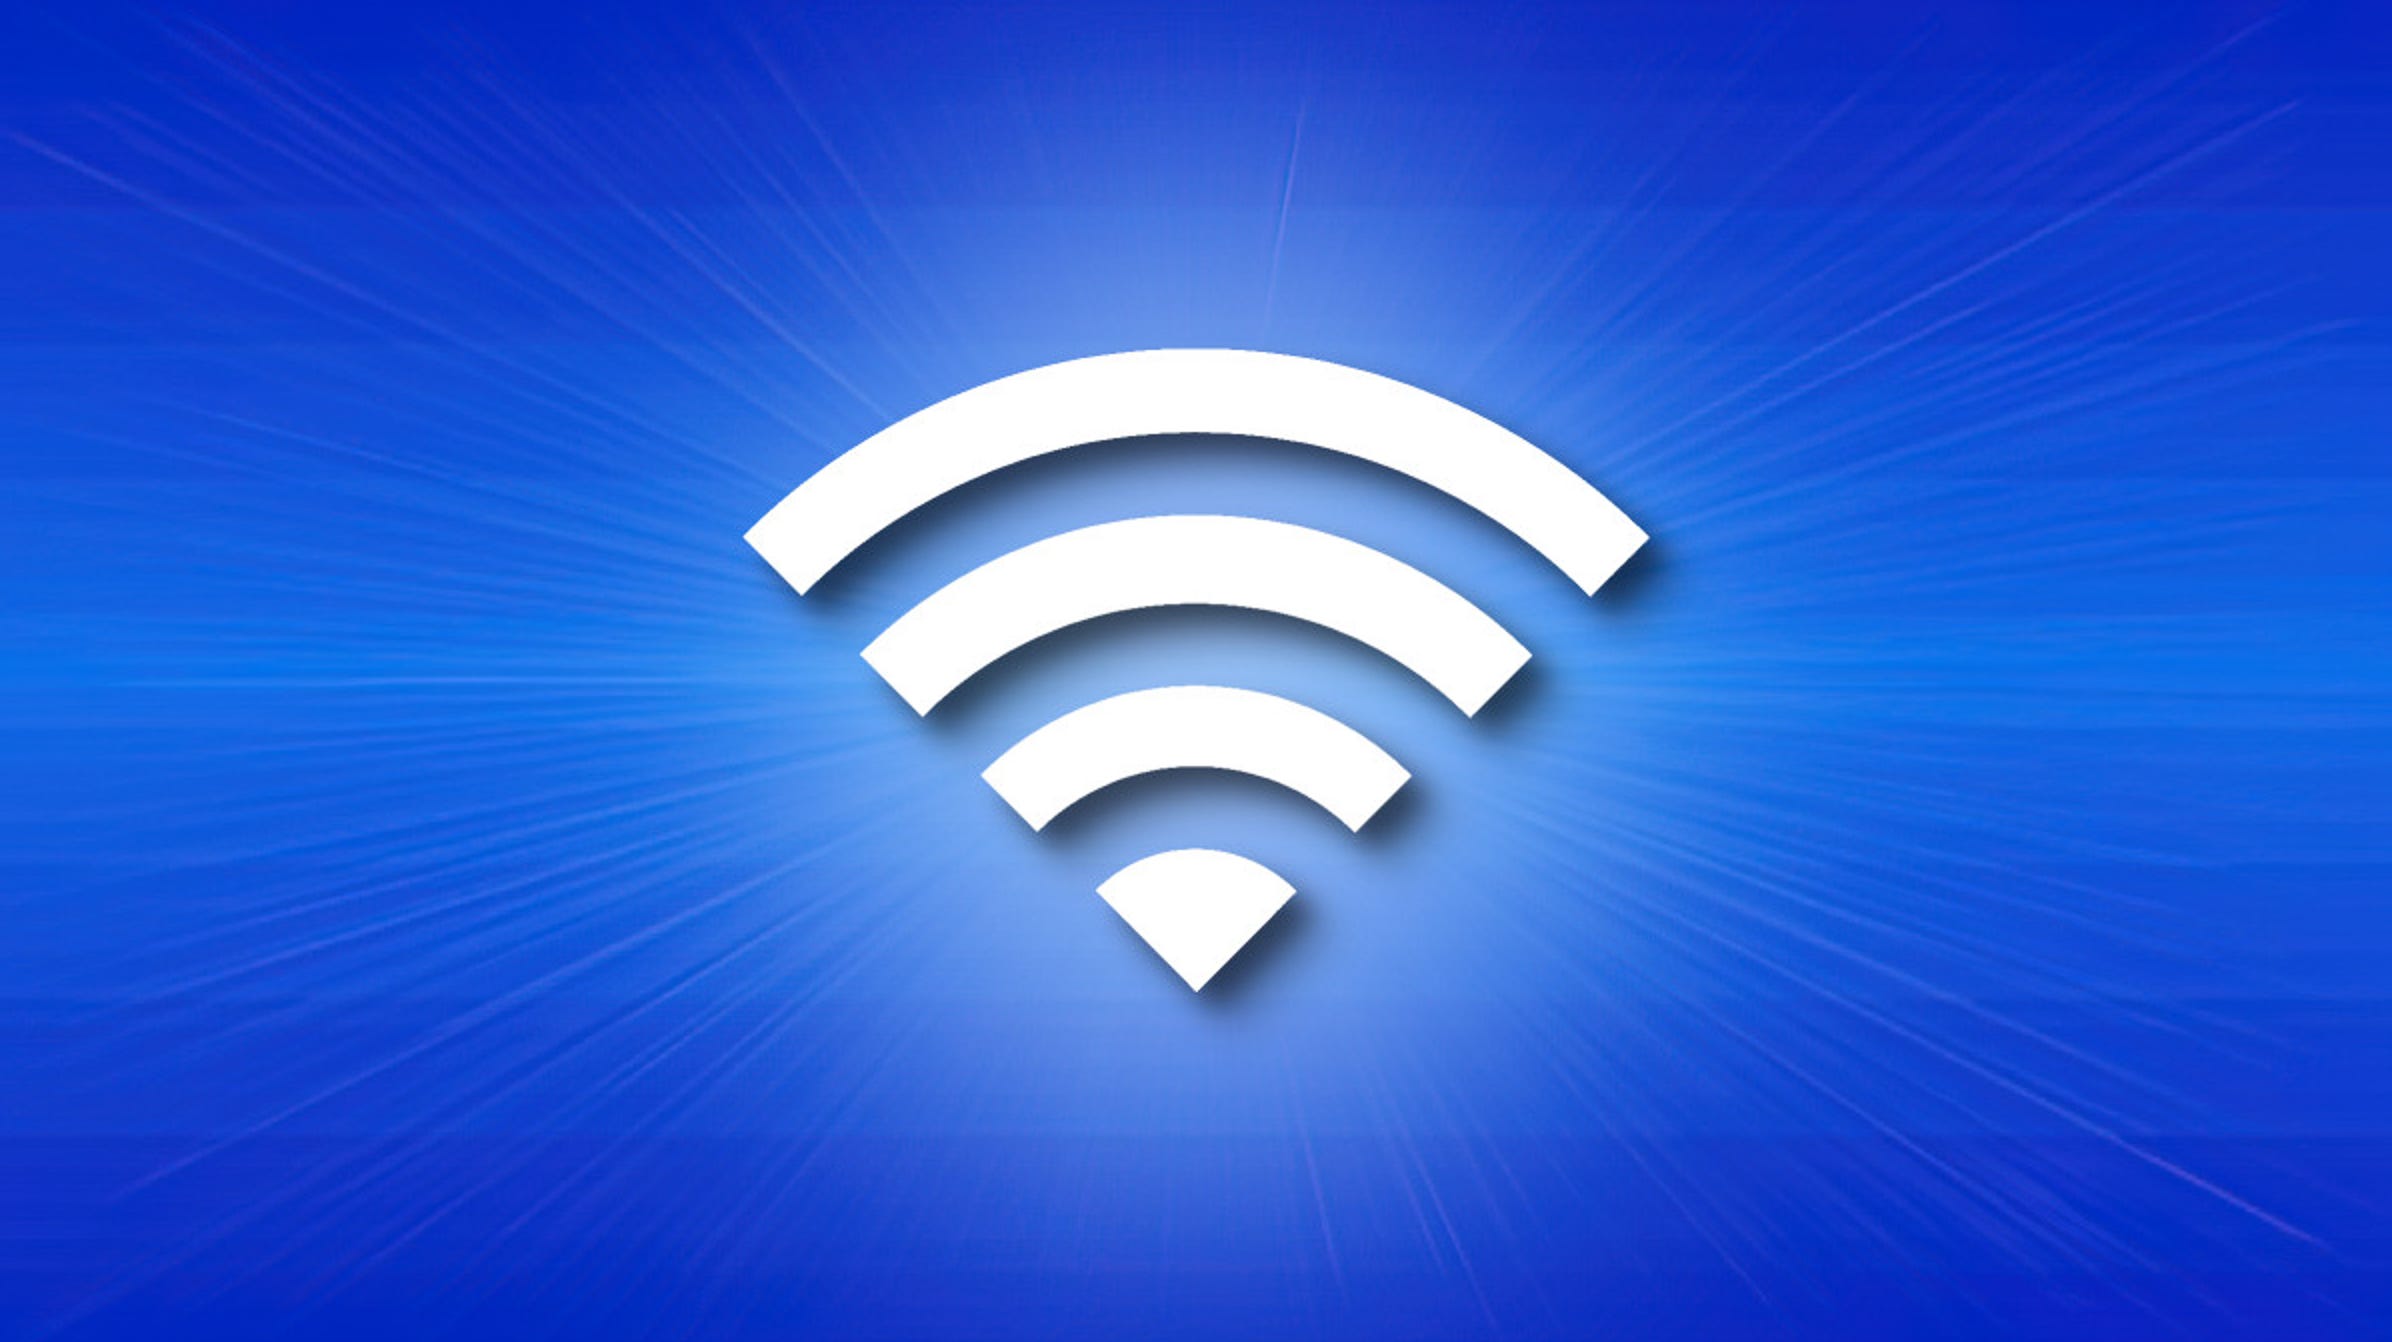 Fix: Why Does My Wi-Fi Say “Weak Security” on iPhone?